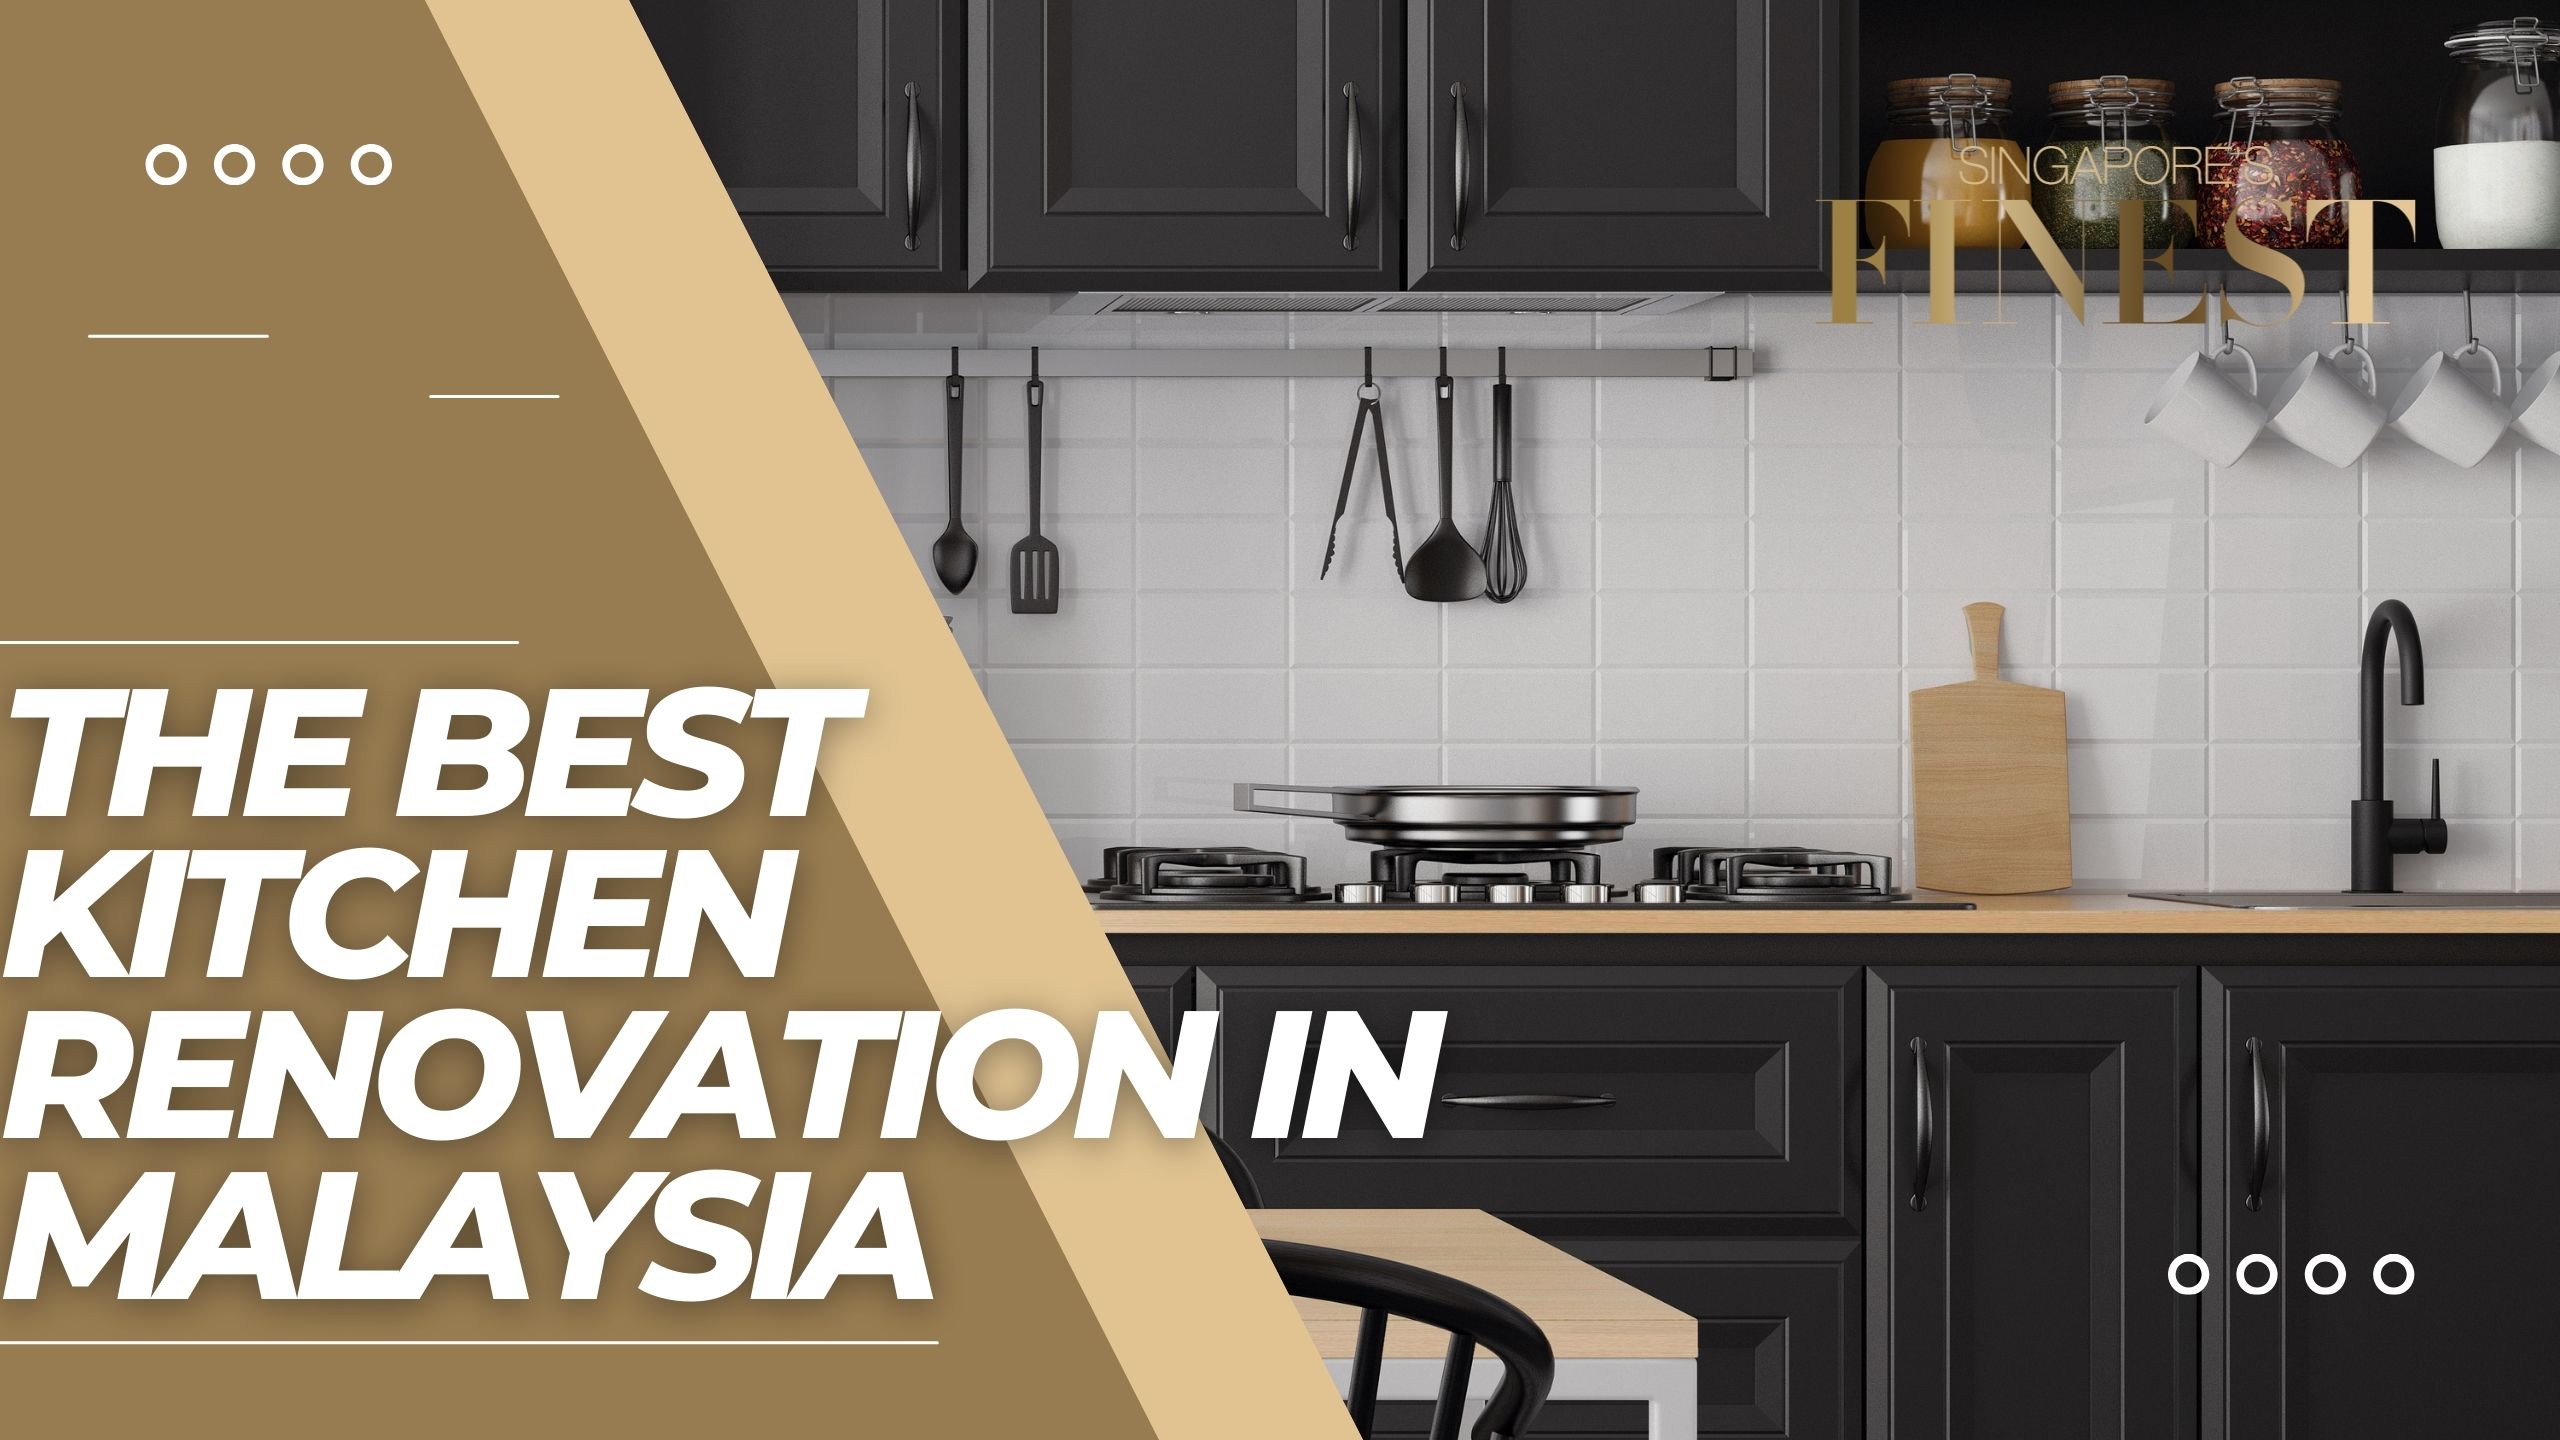 The Finest Kitchen Renovation in Malaysia